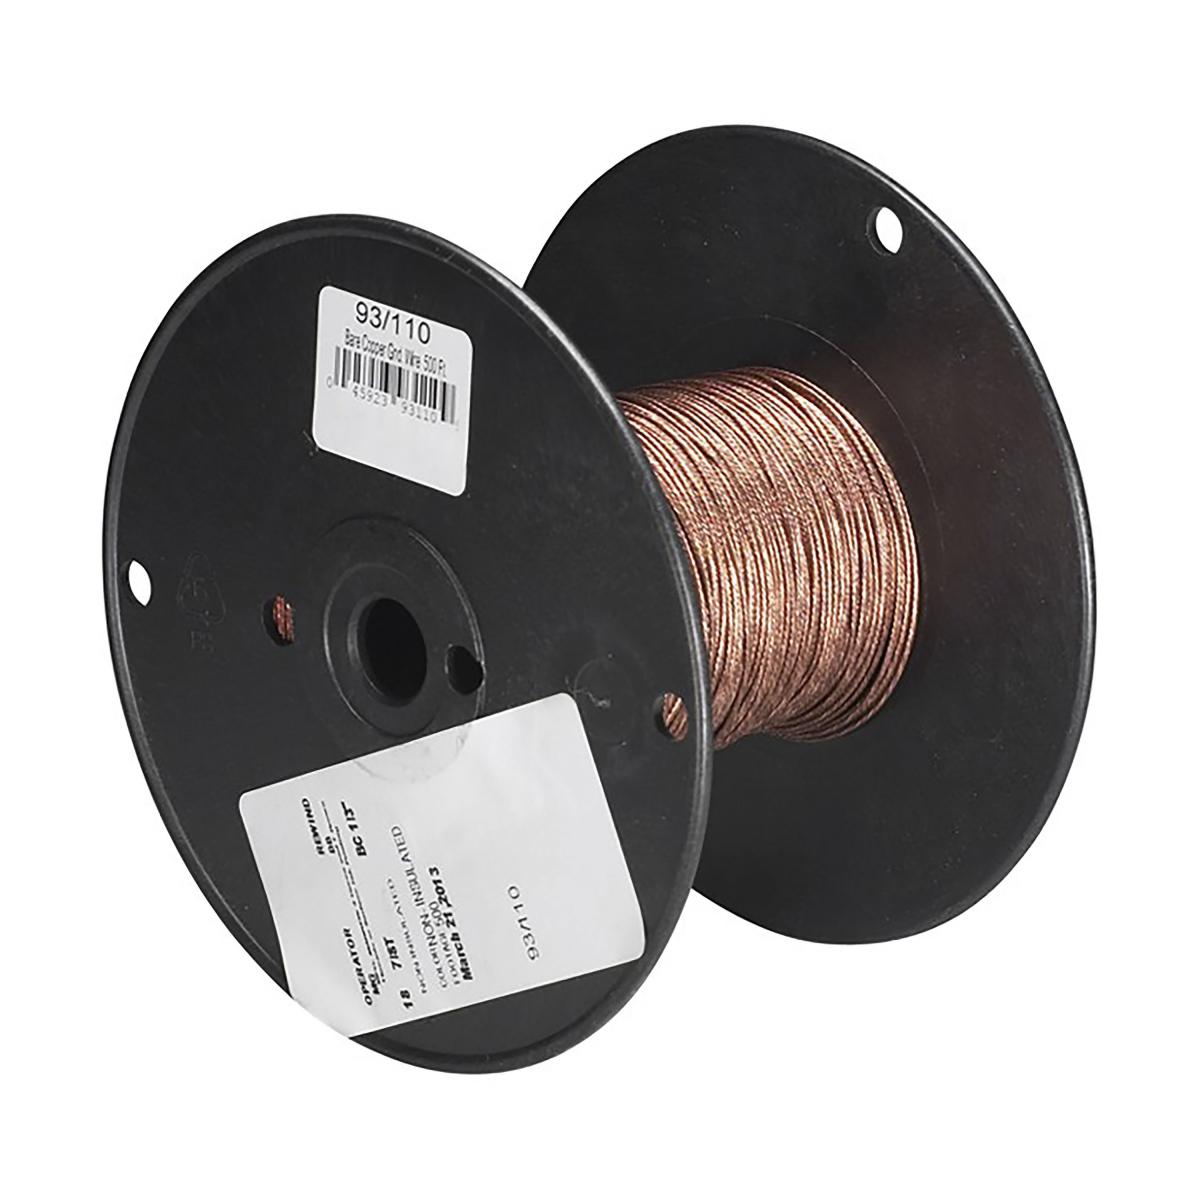 Satco 93-110 Lamp And Lighting Bulk Wire 18/1 Grounding Wire 500 Foot/Spool Bare Copper